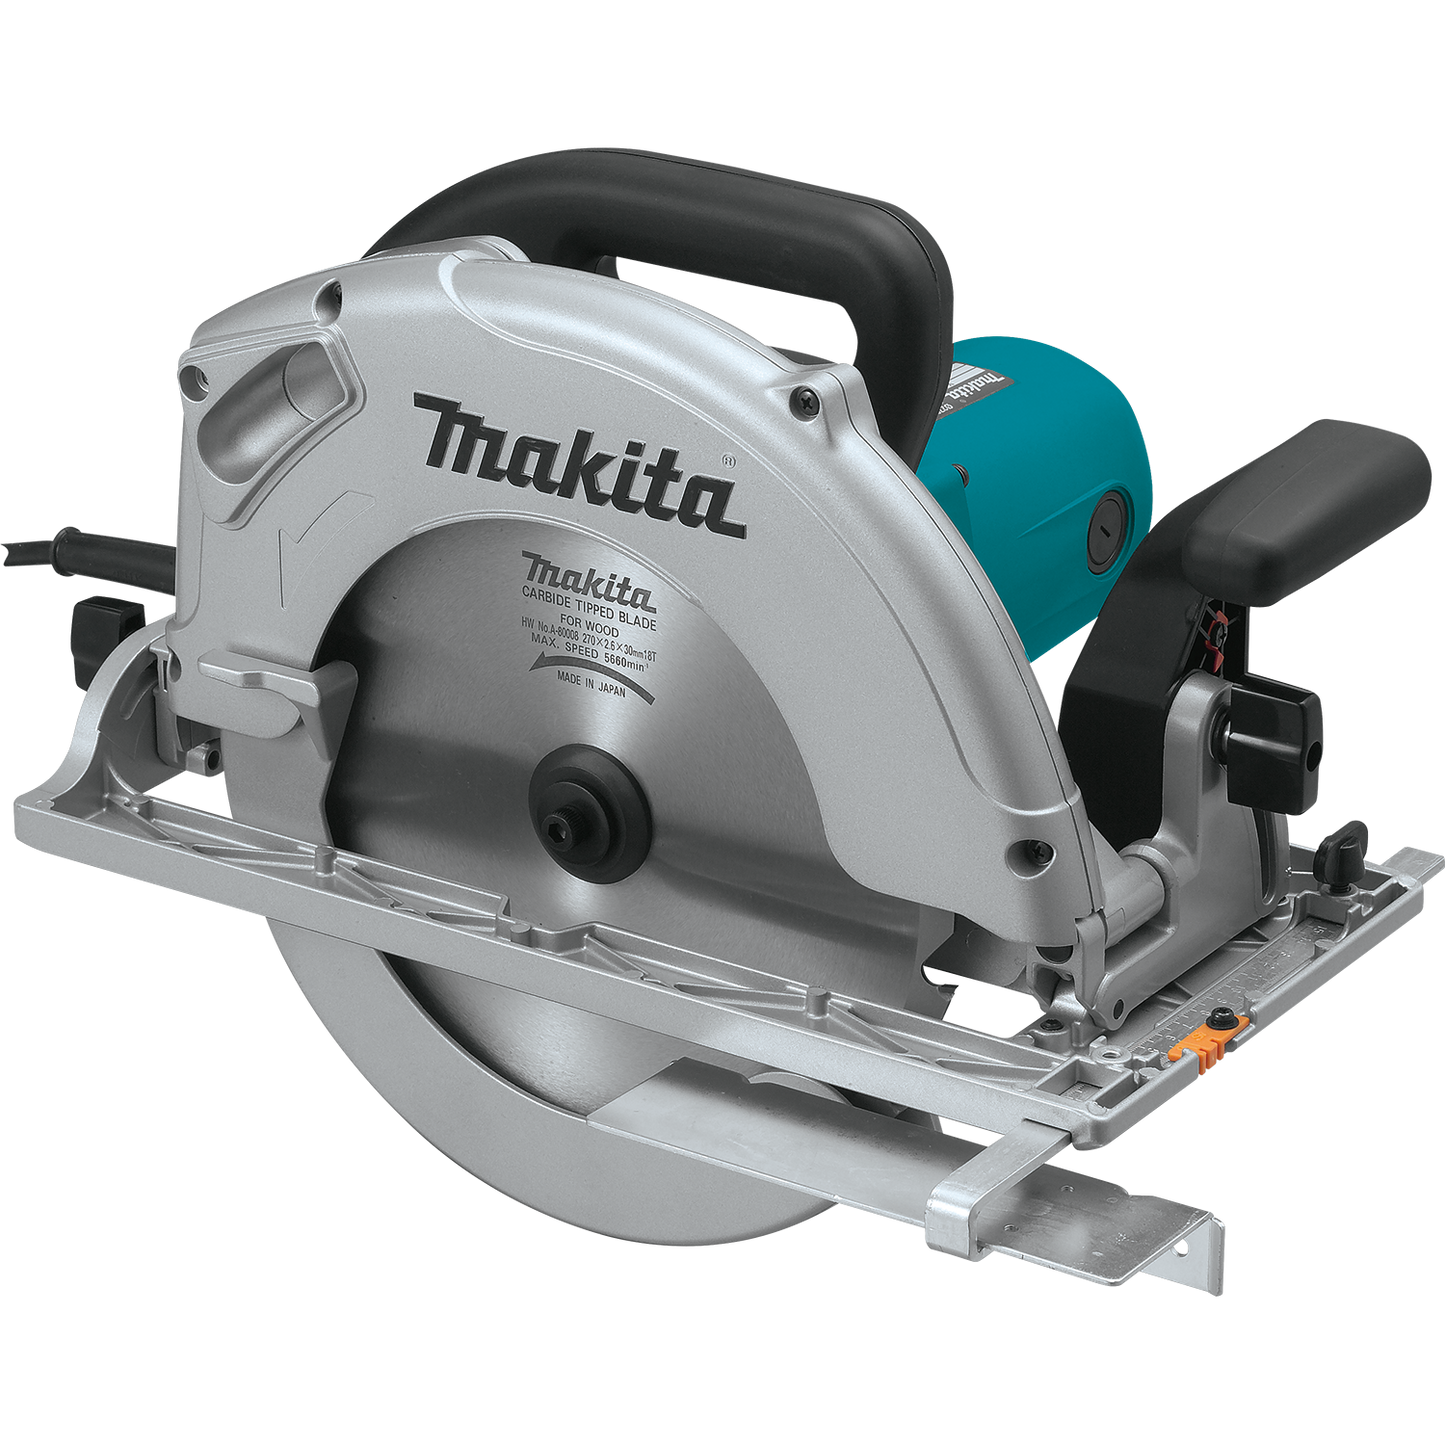 Makita 10 1/4 Inch Circular Saw With Electric Brake Factory Serviced